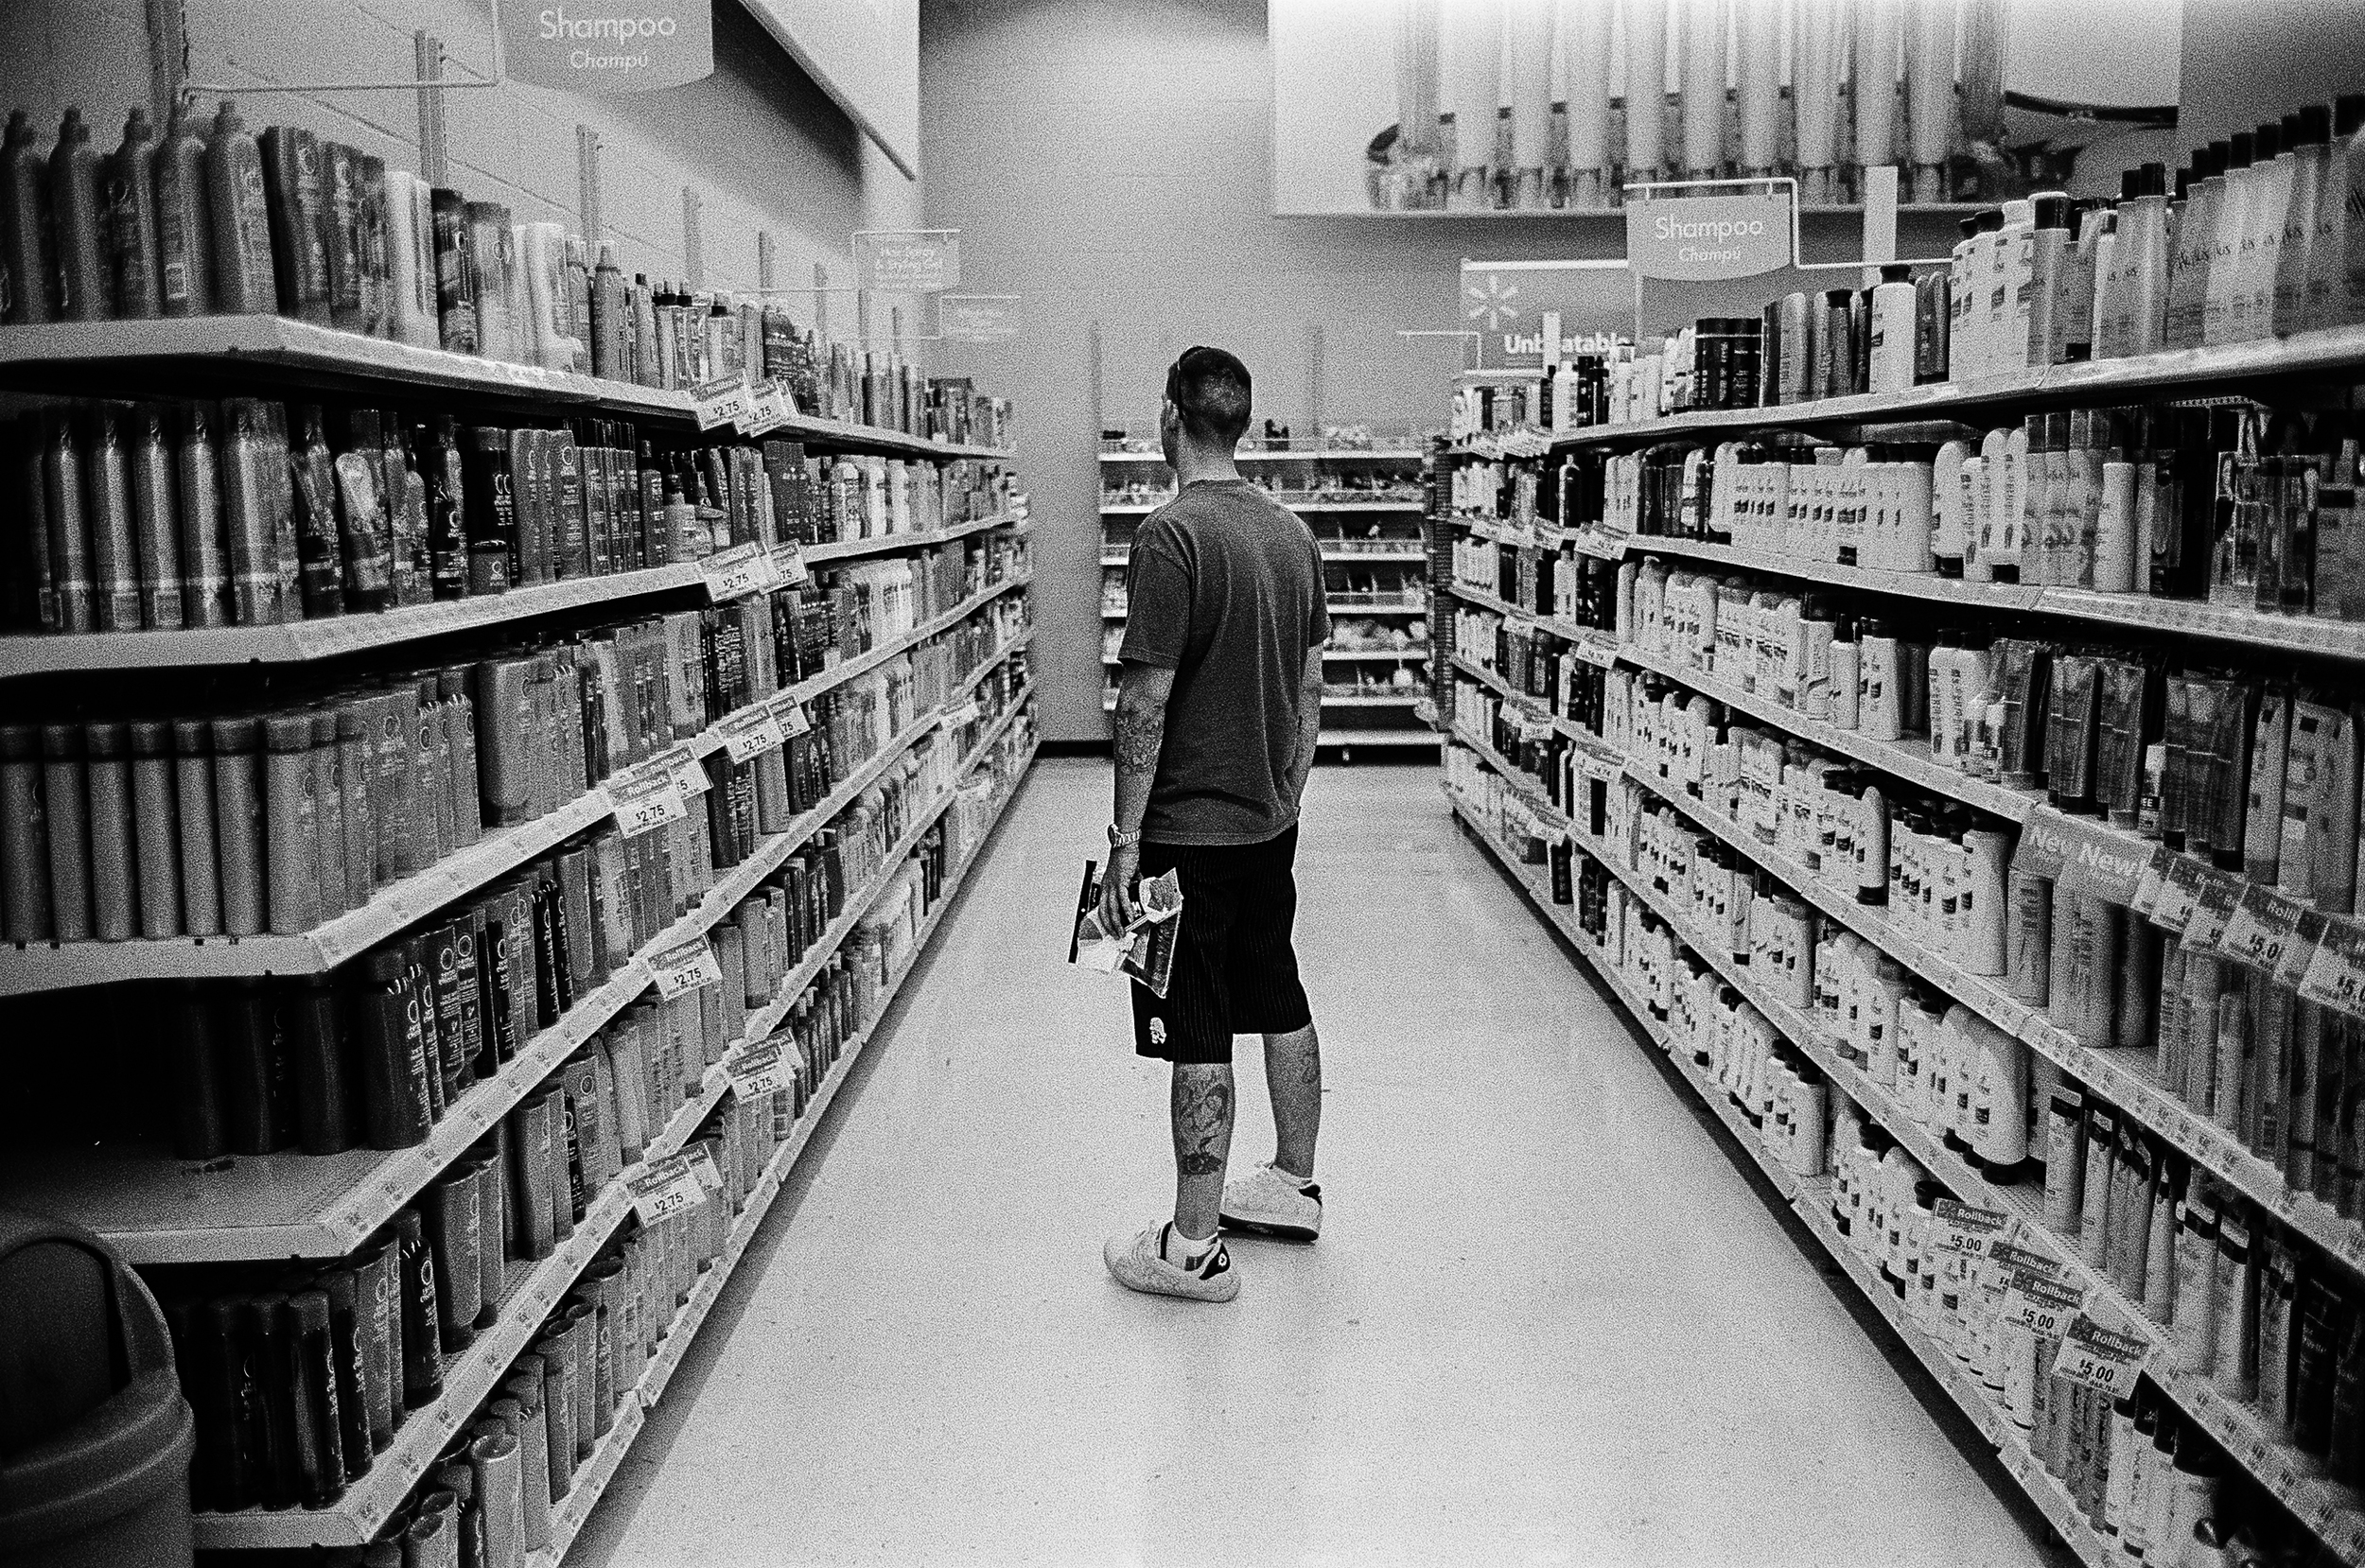  Veteran William Martinez is overwhelmed by the choices of products during his first visit to a Walmart after returning home from serving 12 months in Afghanistan;&nbsp;Corpus Christie, Texas,&nbsp;2010. Martinez can only stay in stores for a few min